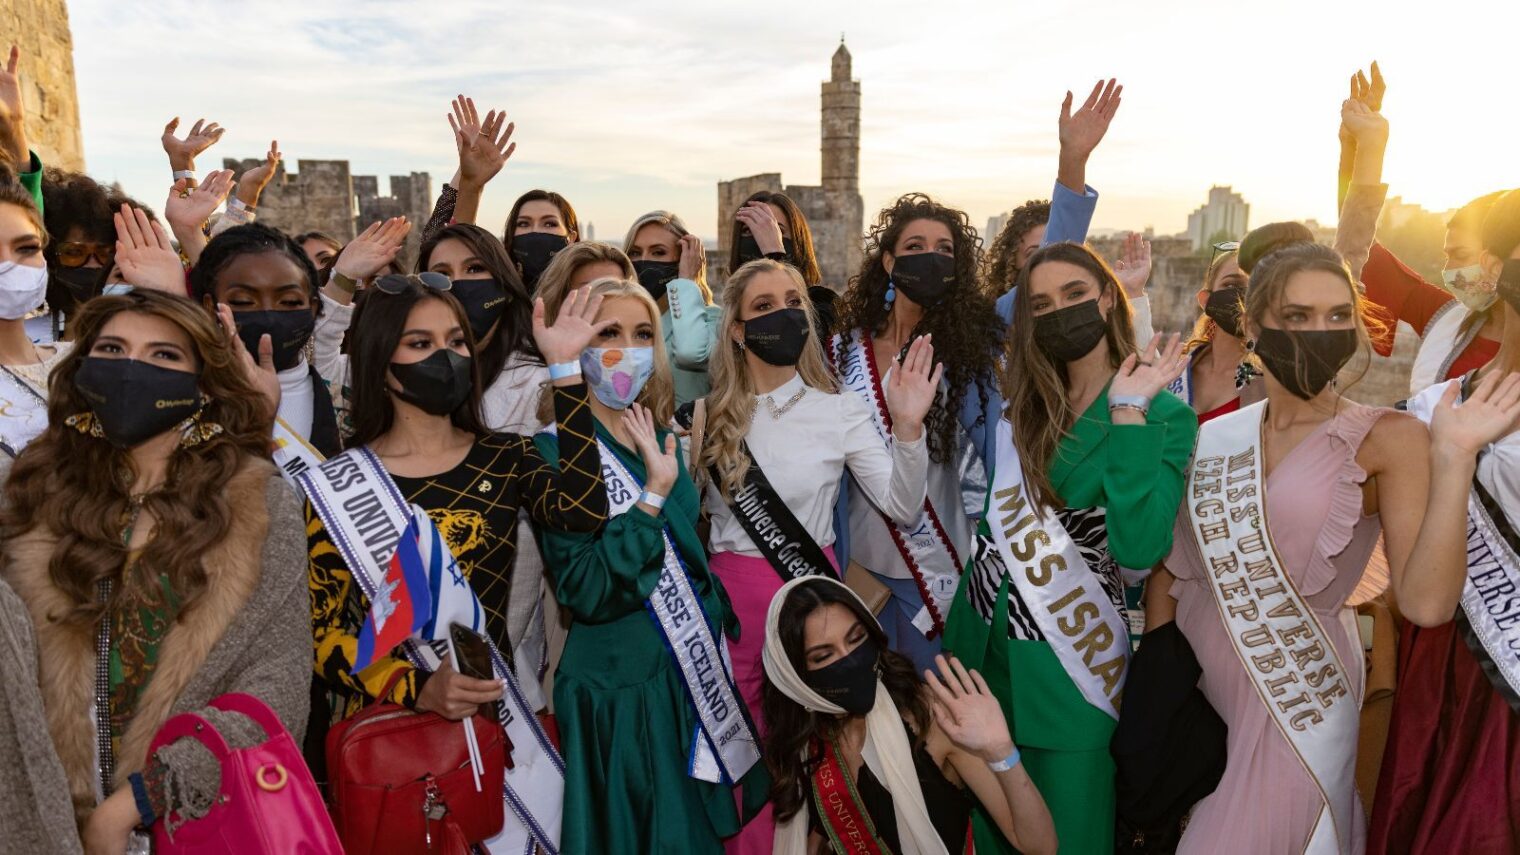 Miss Universe contestants visit the Old City of Jerusalem ahead of the 70th edition of the pageant, held in Israel for the first time. Photo by Olivier Fitoussi/Flash90